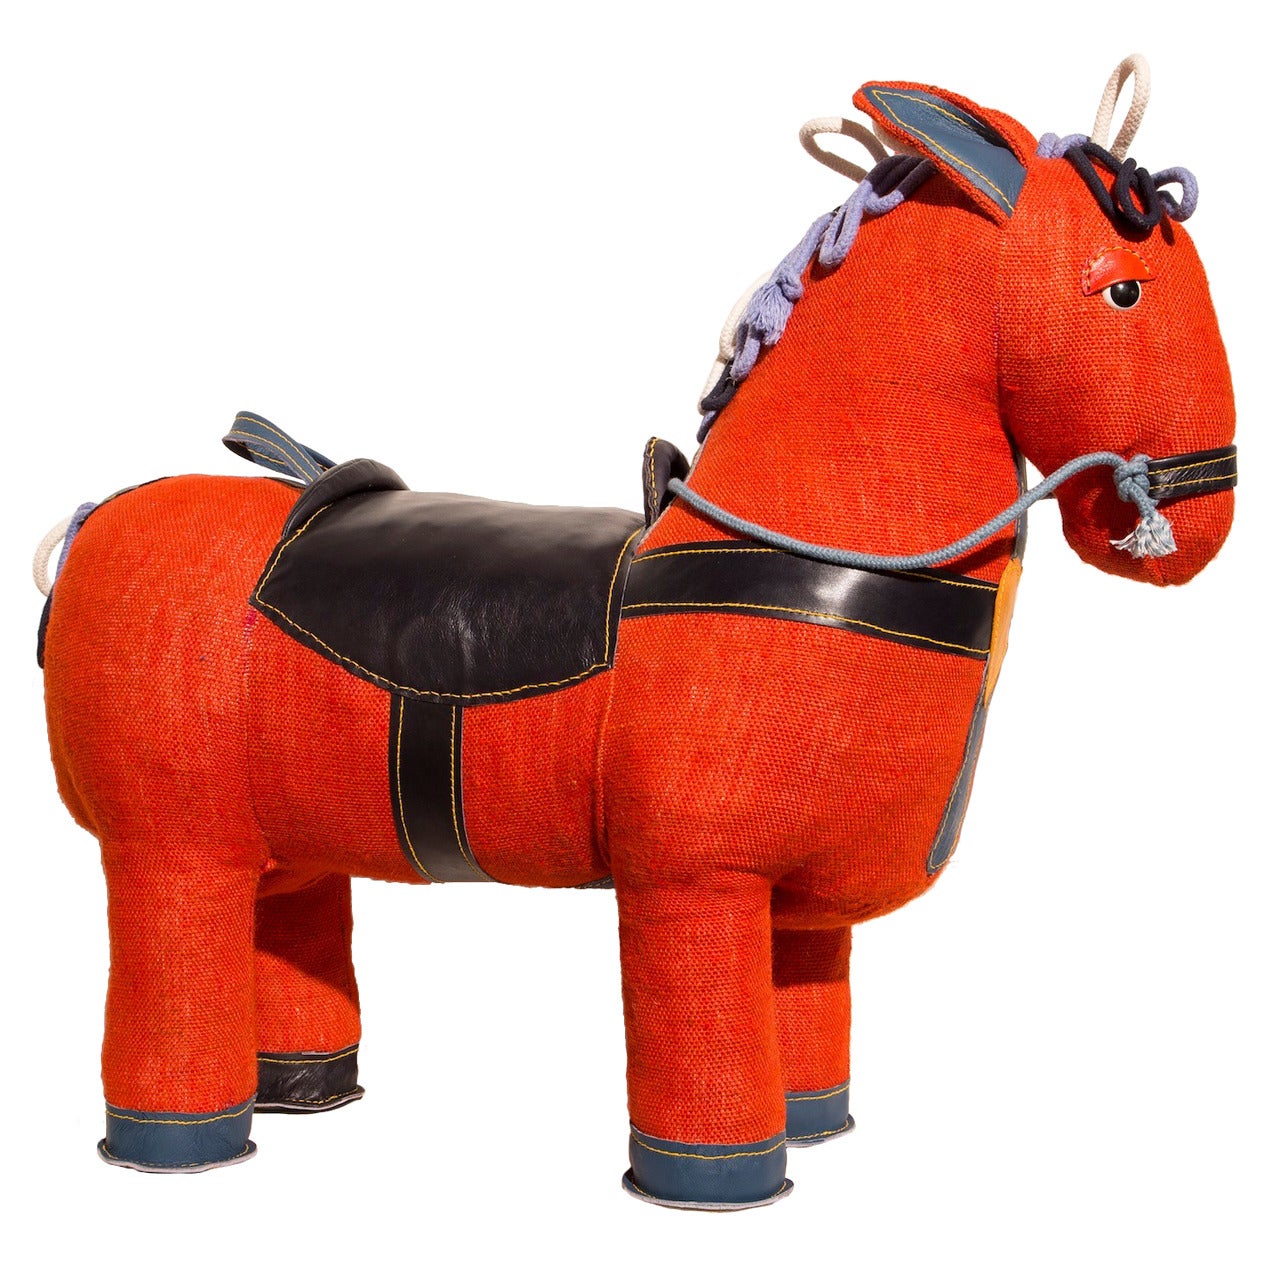 "Therapeutic Toy" Magic Horse in Orange Jute by Renate Müller, 2015